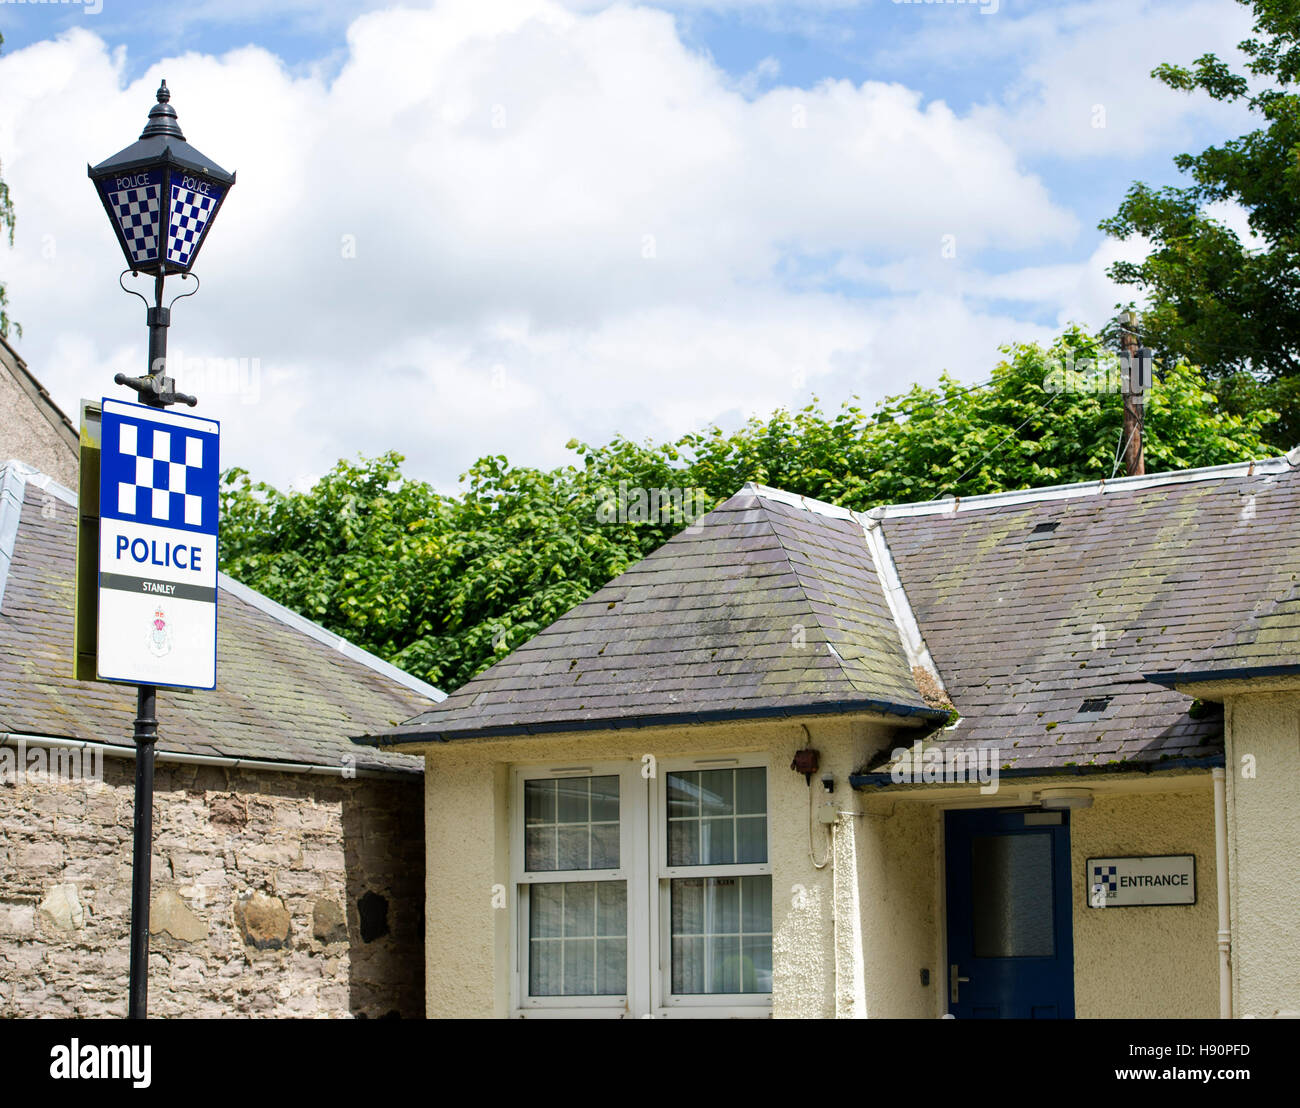 Old style,police sign on lampost outside, Stanley Police station, Stanley village, Perthshire, Scotland Stock Photo